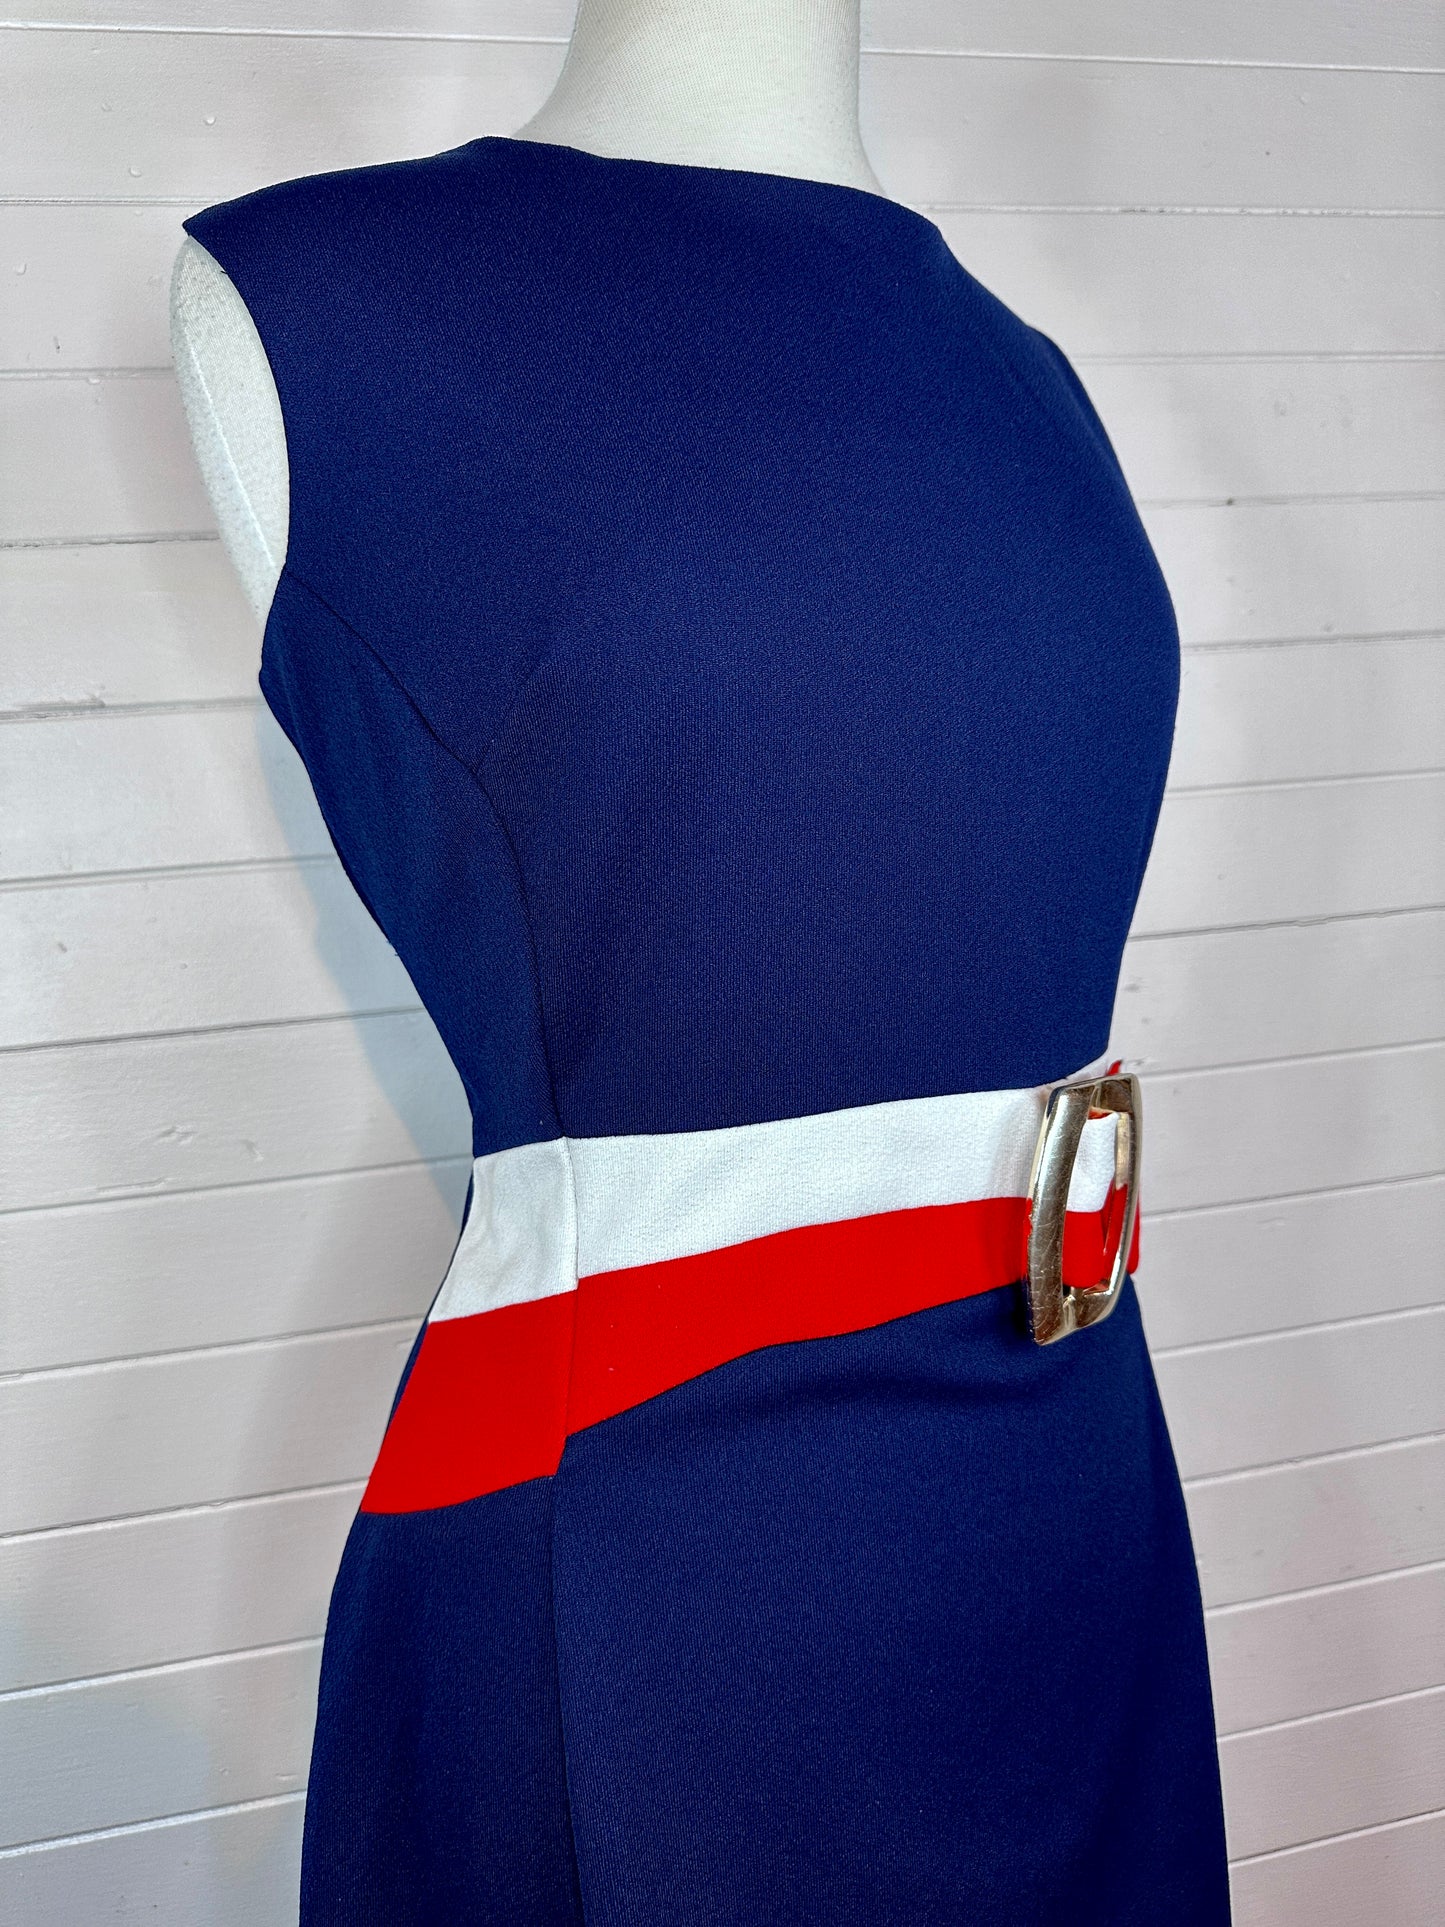 1960's Red White and Navy Blue Maxi Dress (L)